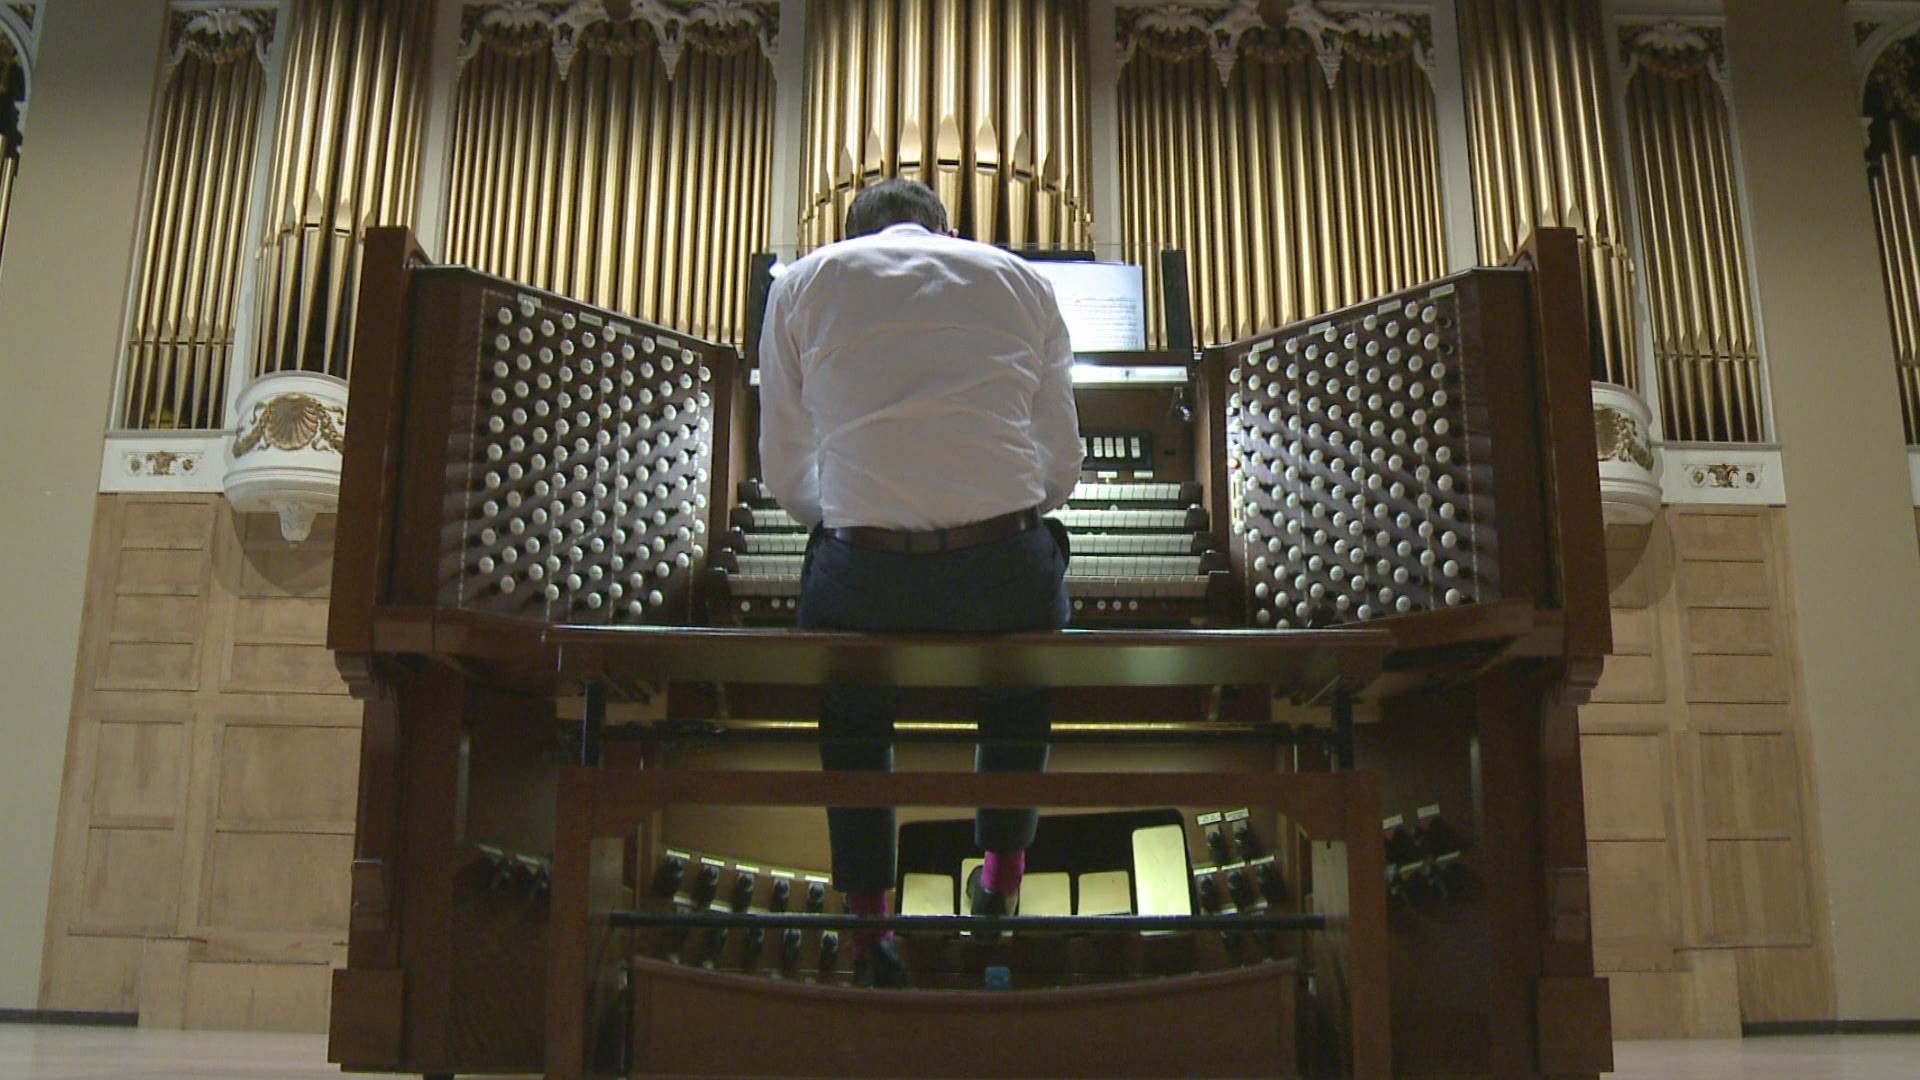 Portland's new municipal organist, James Kennerley, performs this classic piece.